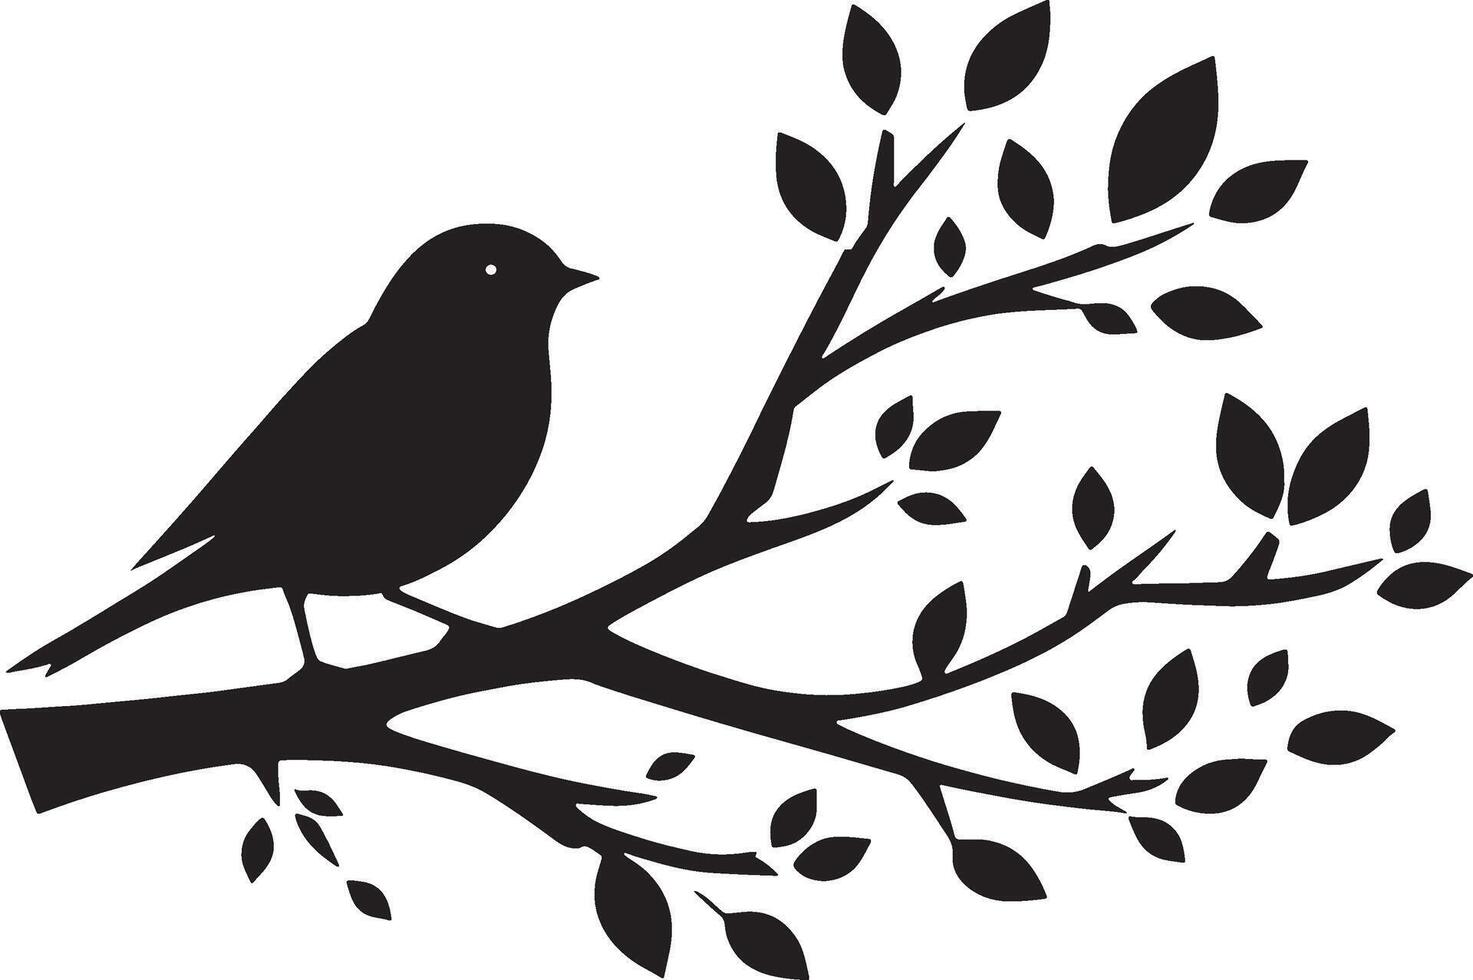 Loving birds on the branch of a tree clipart silhouette in black colour. Dove illustration template for tattoo or laser cutting vector